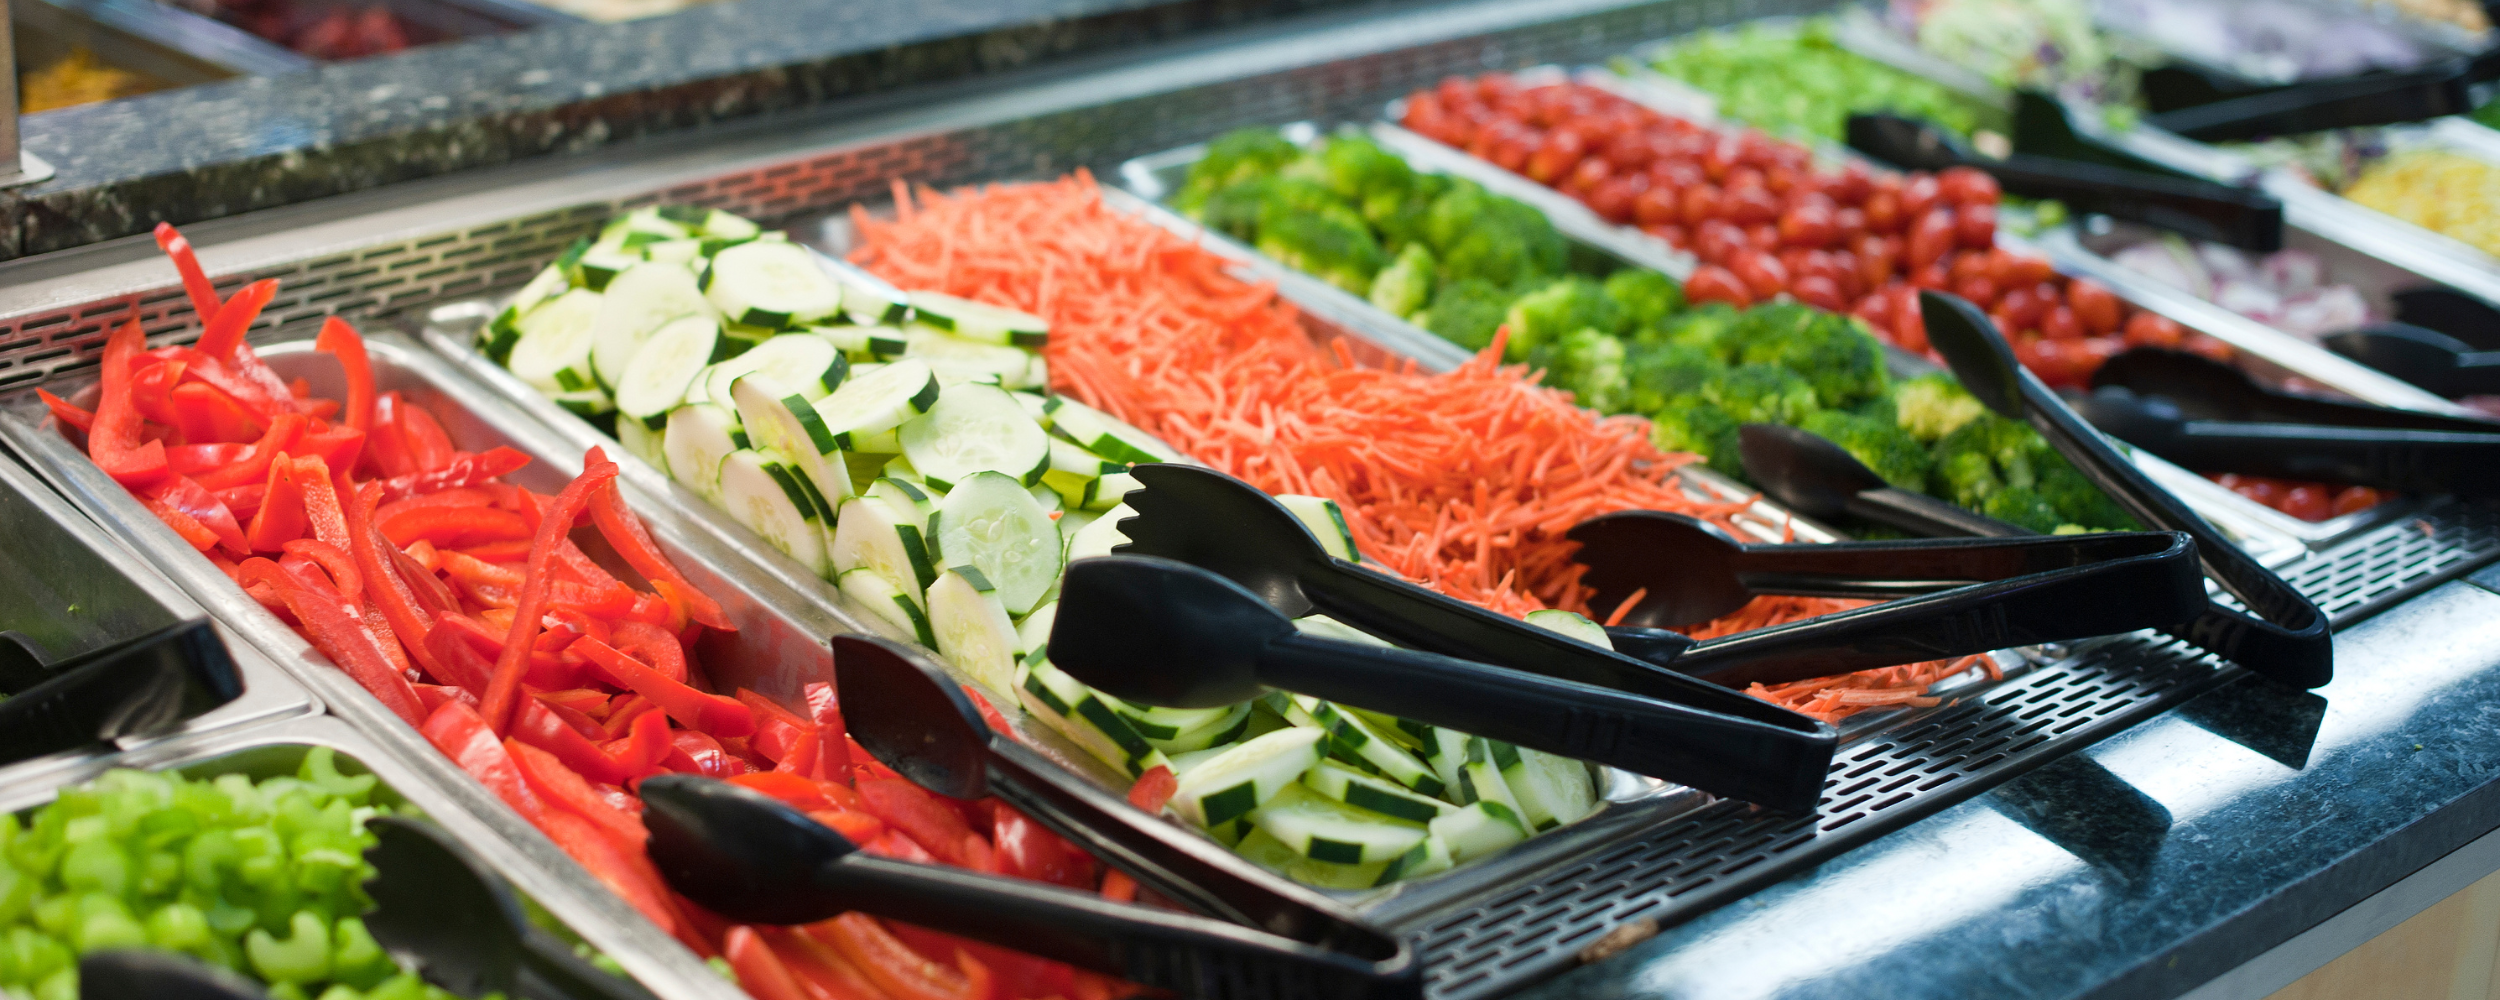 salad bar using stainless steel food pans